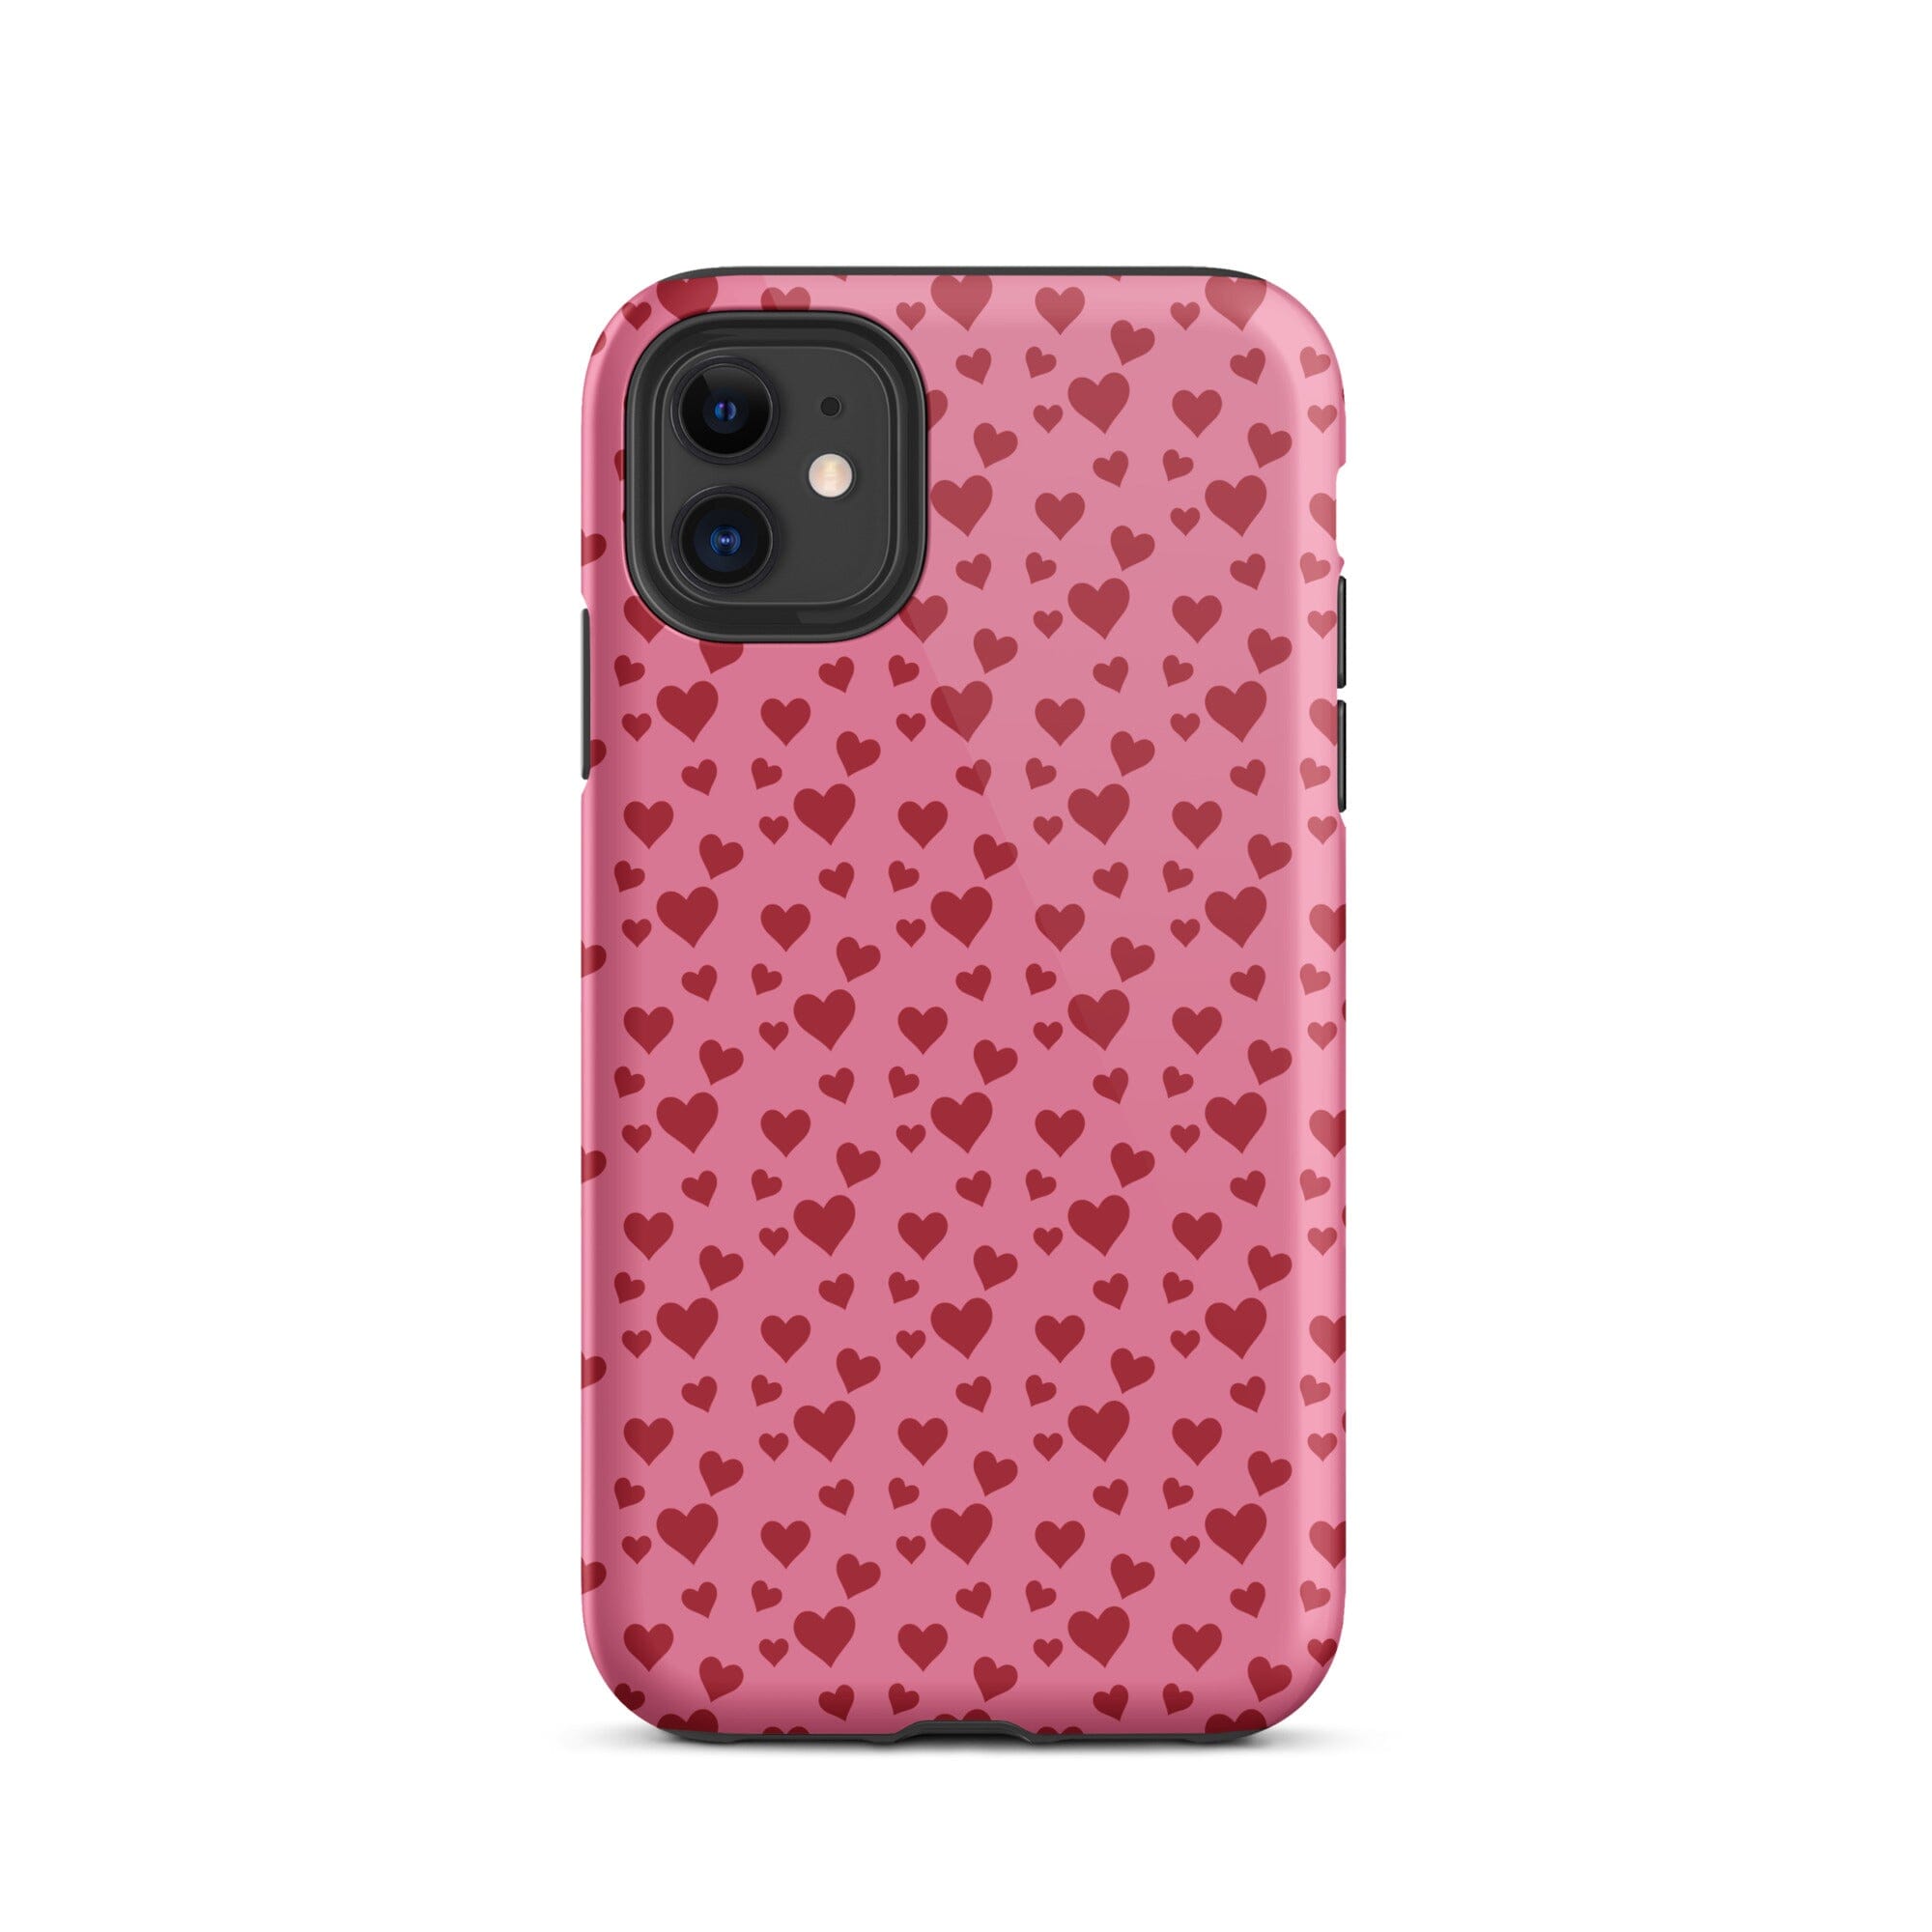 Sweet Hearts iPhone Case Knitted Belle Boutique iPhone 11 